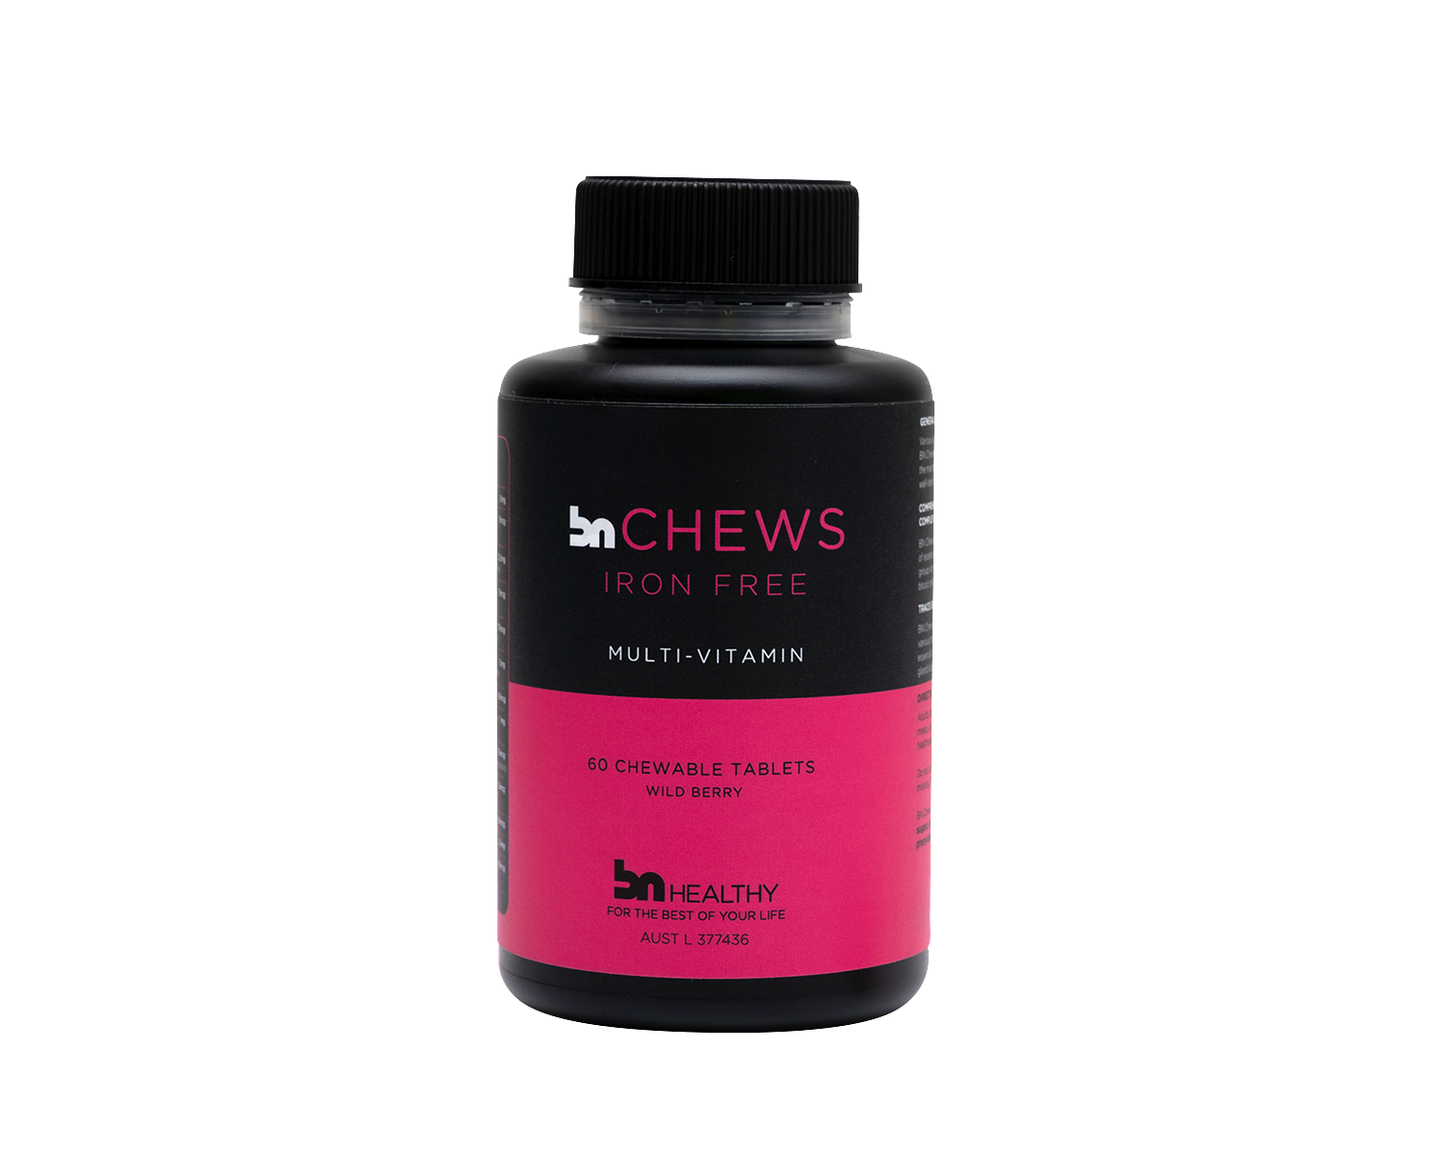 BN Chews Iron-Free - Chewable Multivitamins - 3 Month Subscription - Save 20%